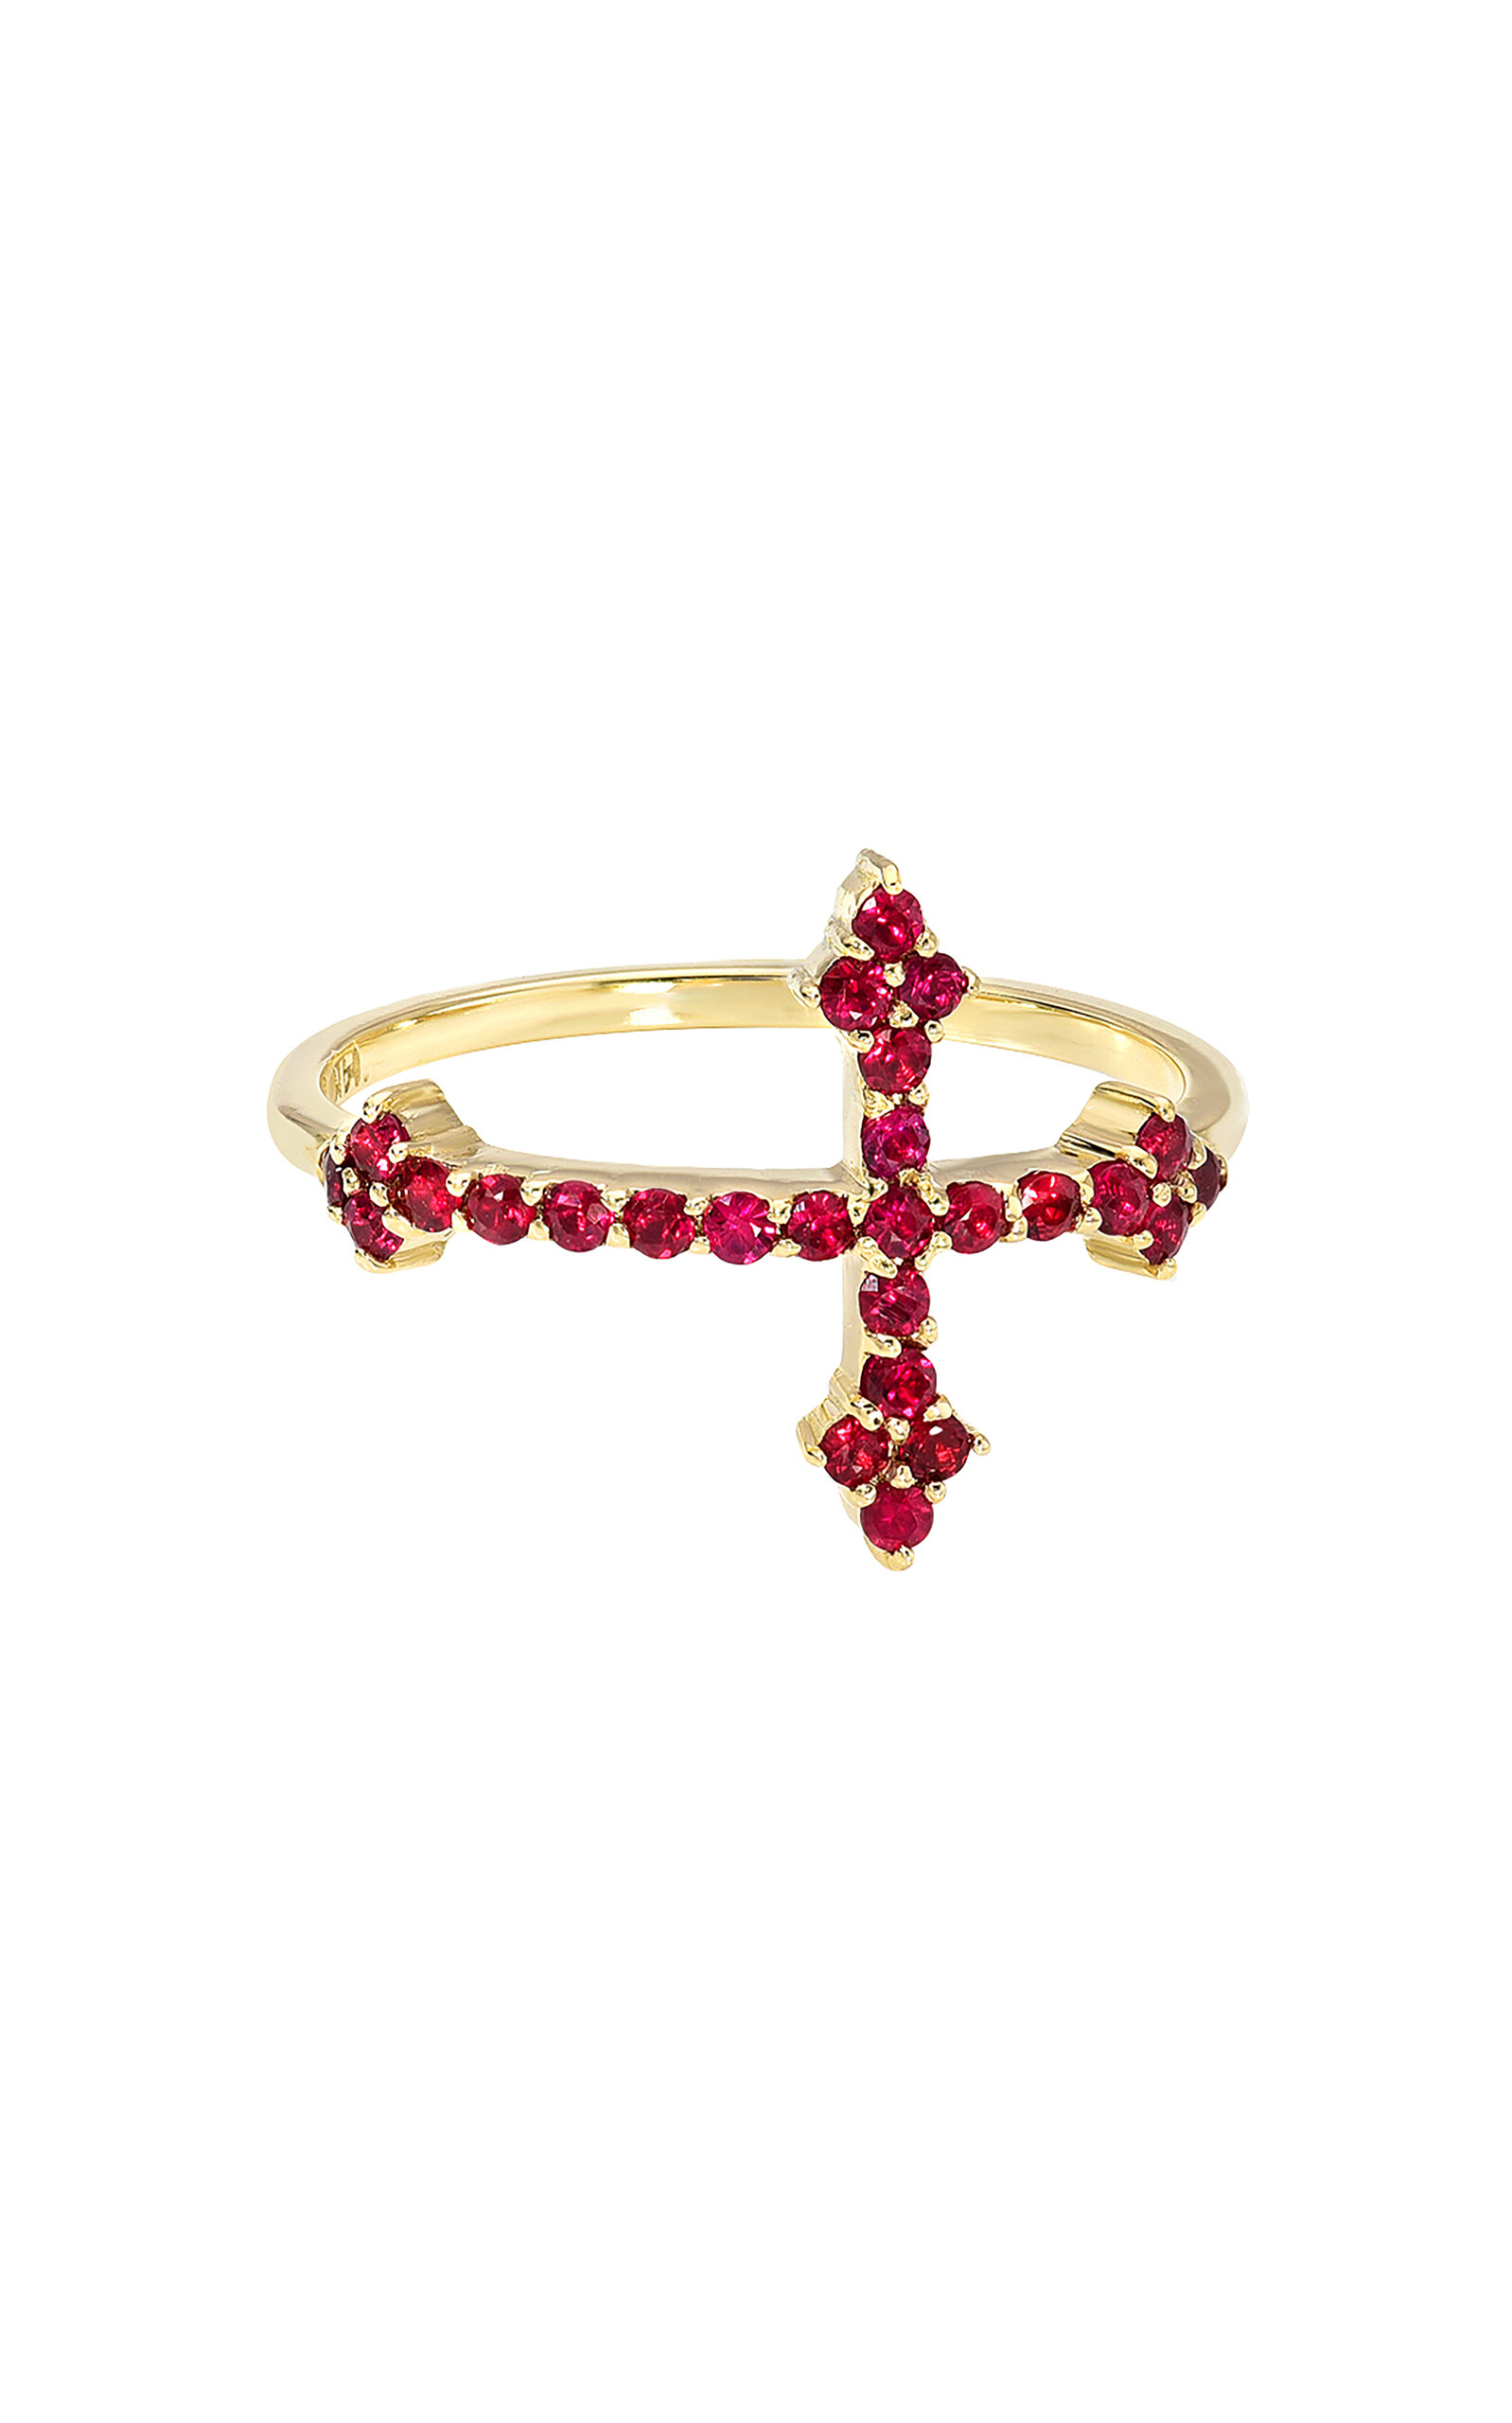 Cross Your Fingers 14K Yellow Gold Ruby Ring